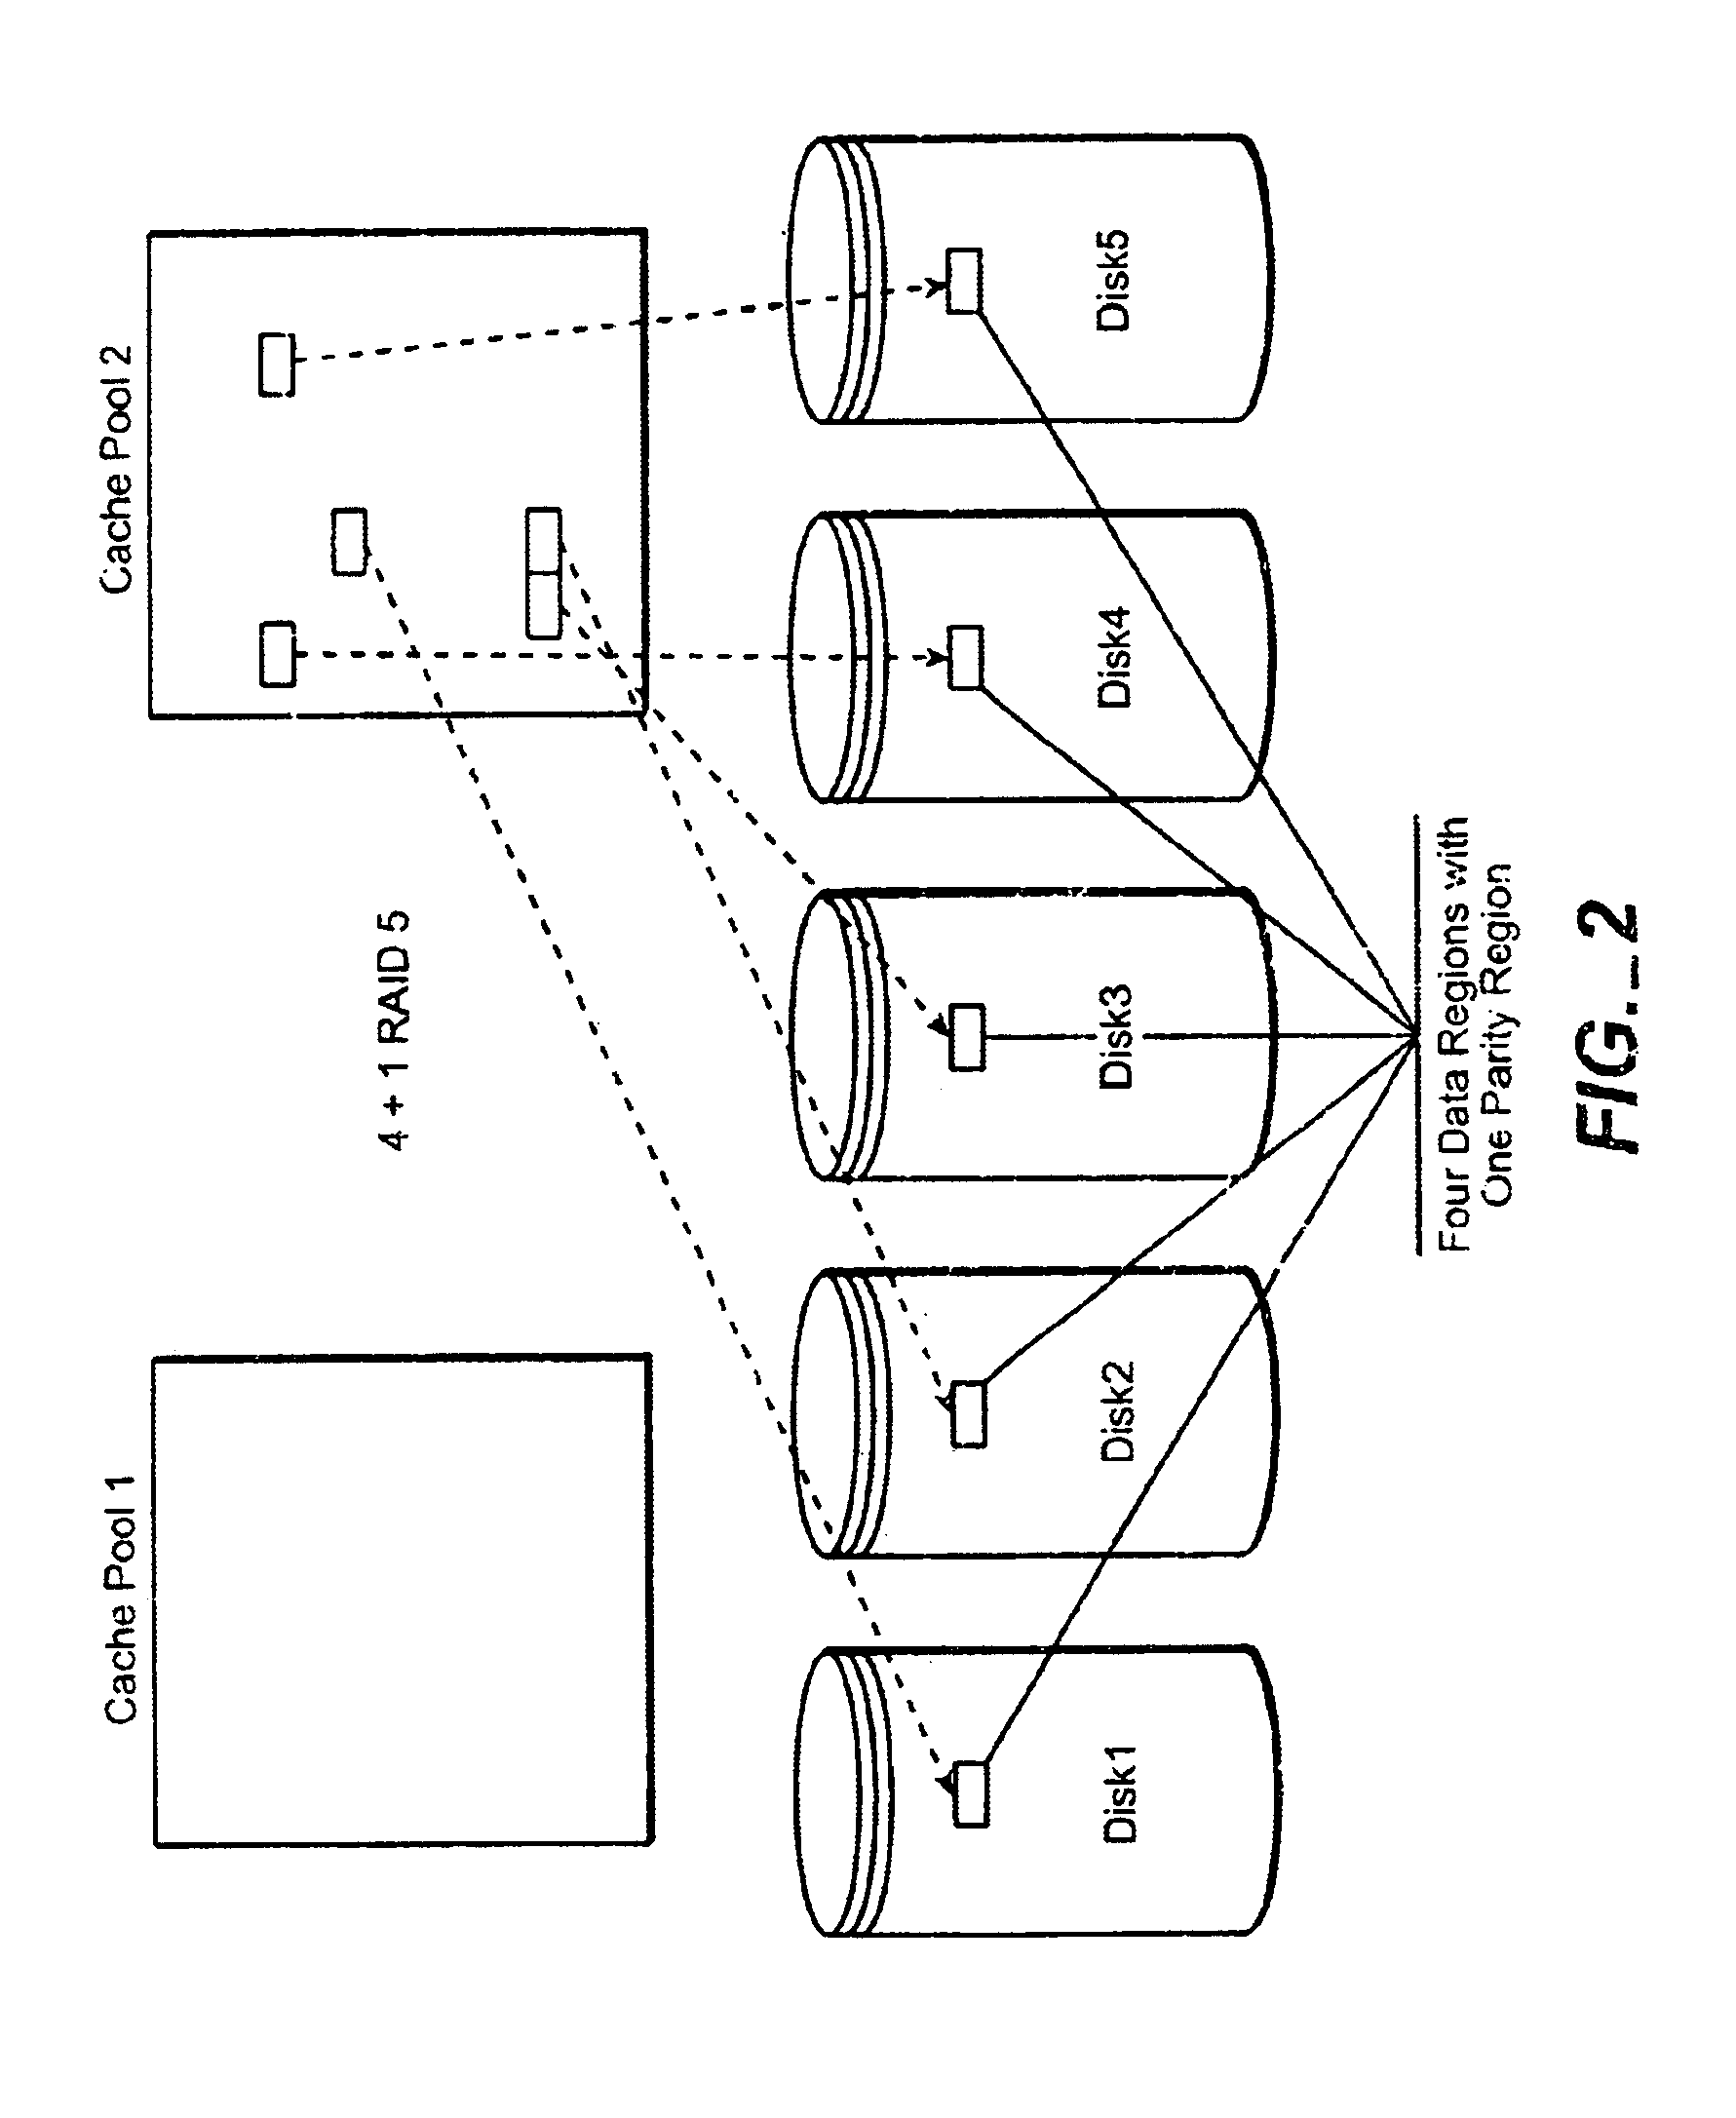 Multiple memory system support through segment assignment